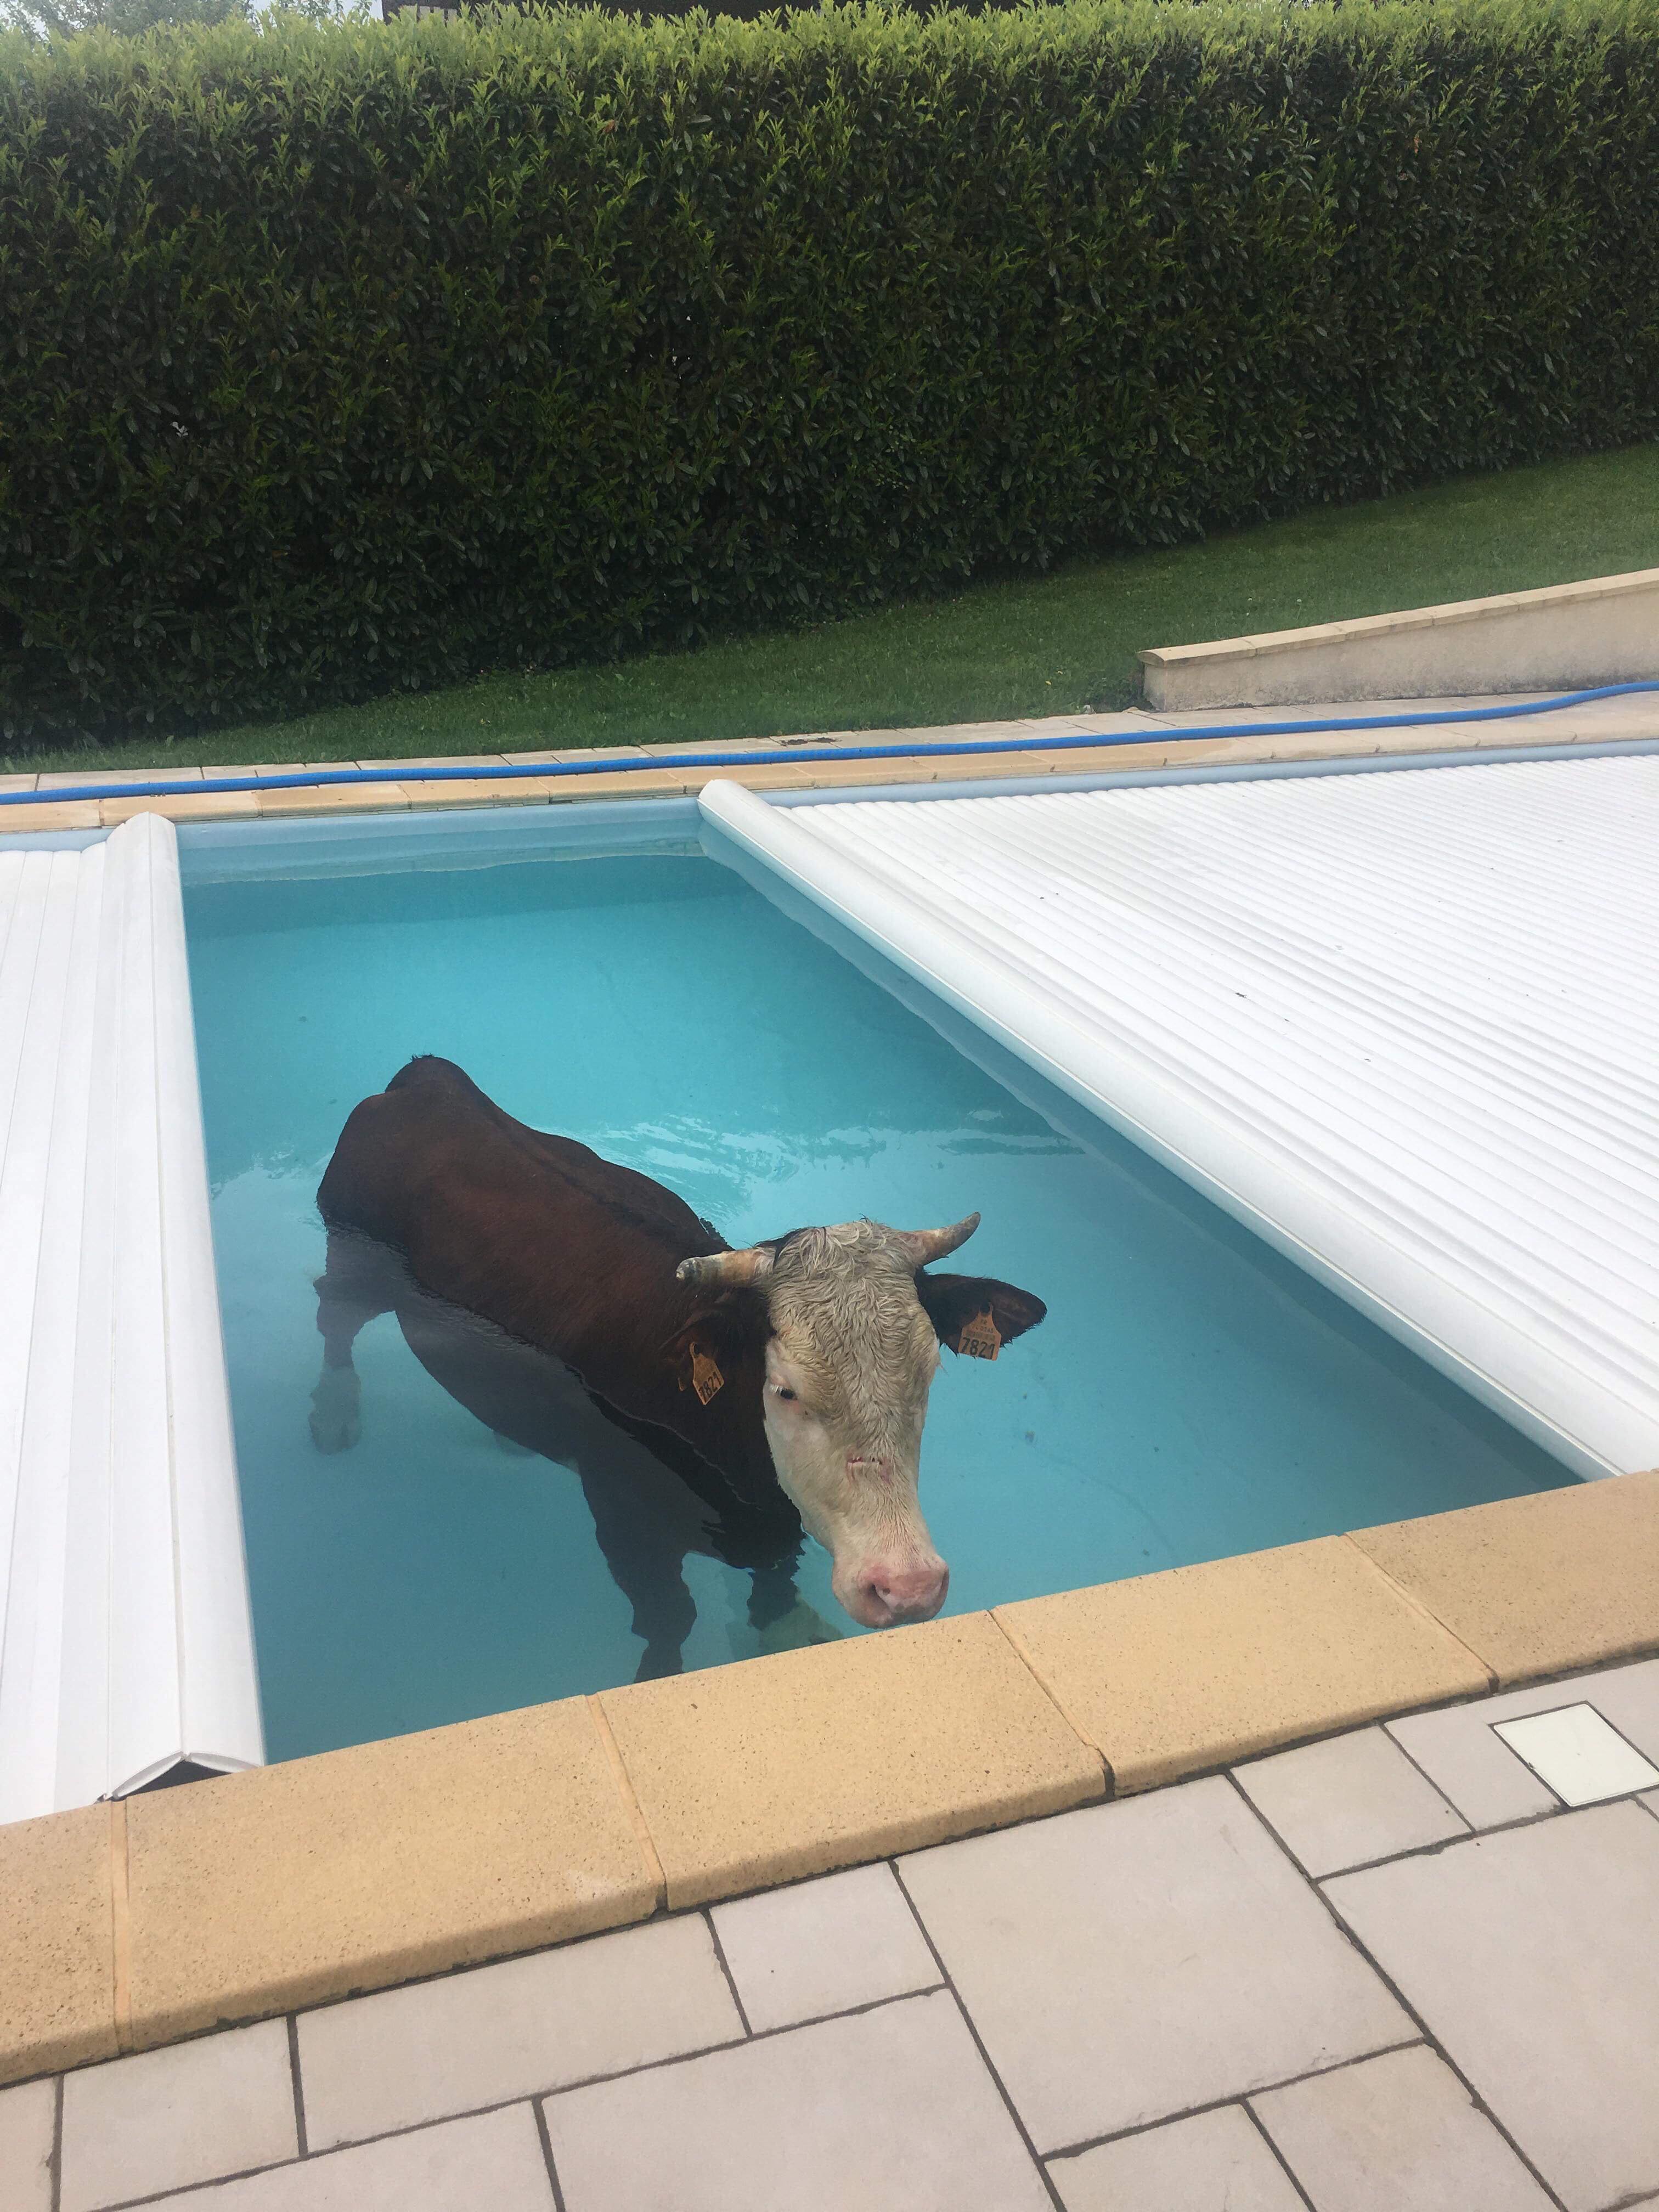 Hey Maud, there's a cow in the pool.